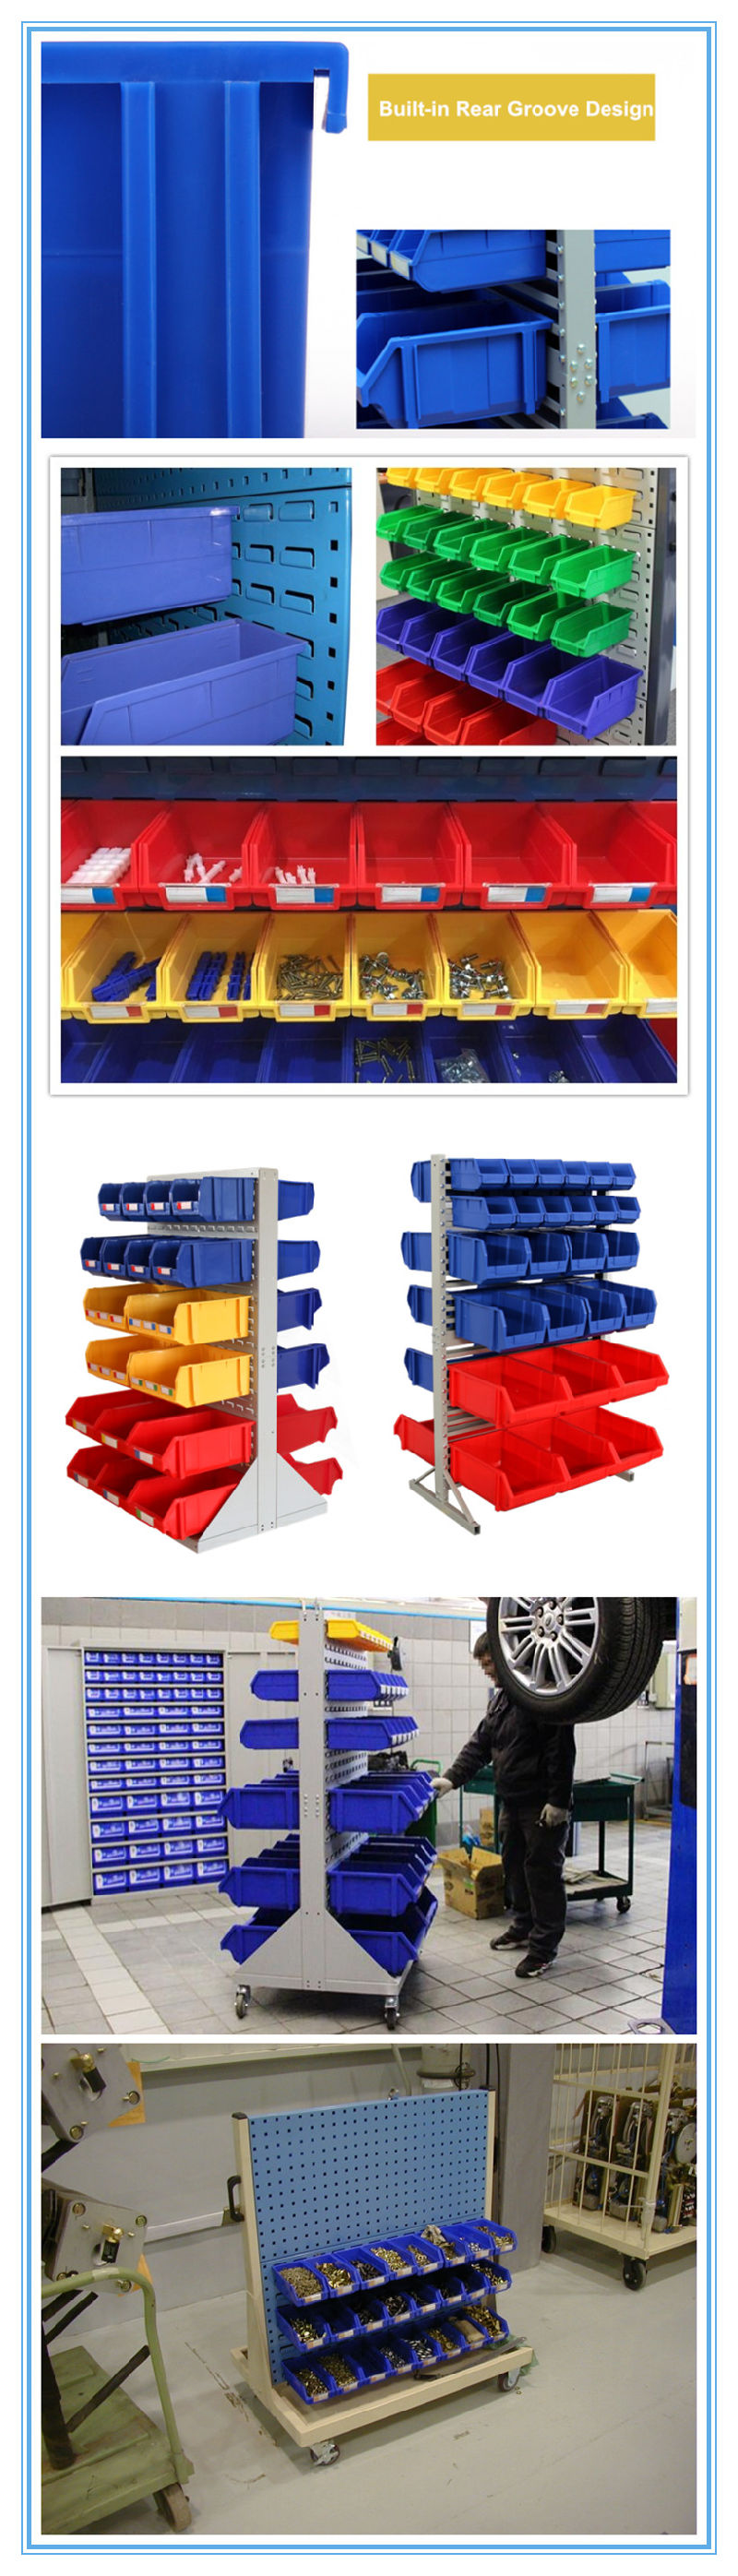 Plastic Hardware Storage and Picking Bins for Sale (PK013)